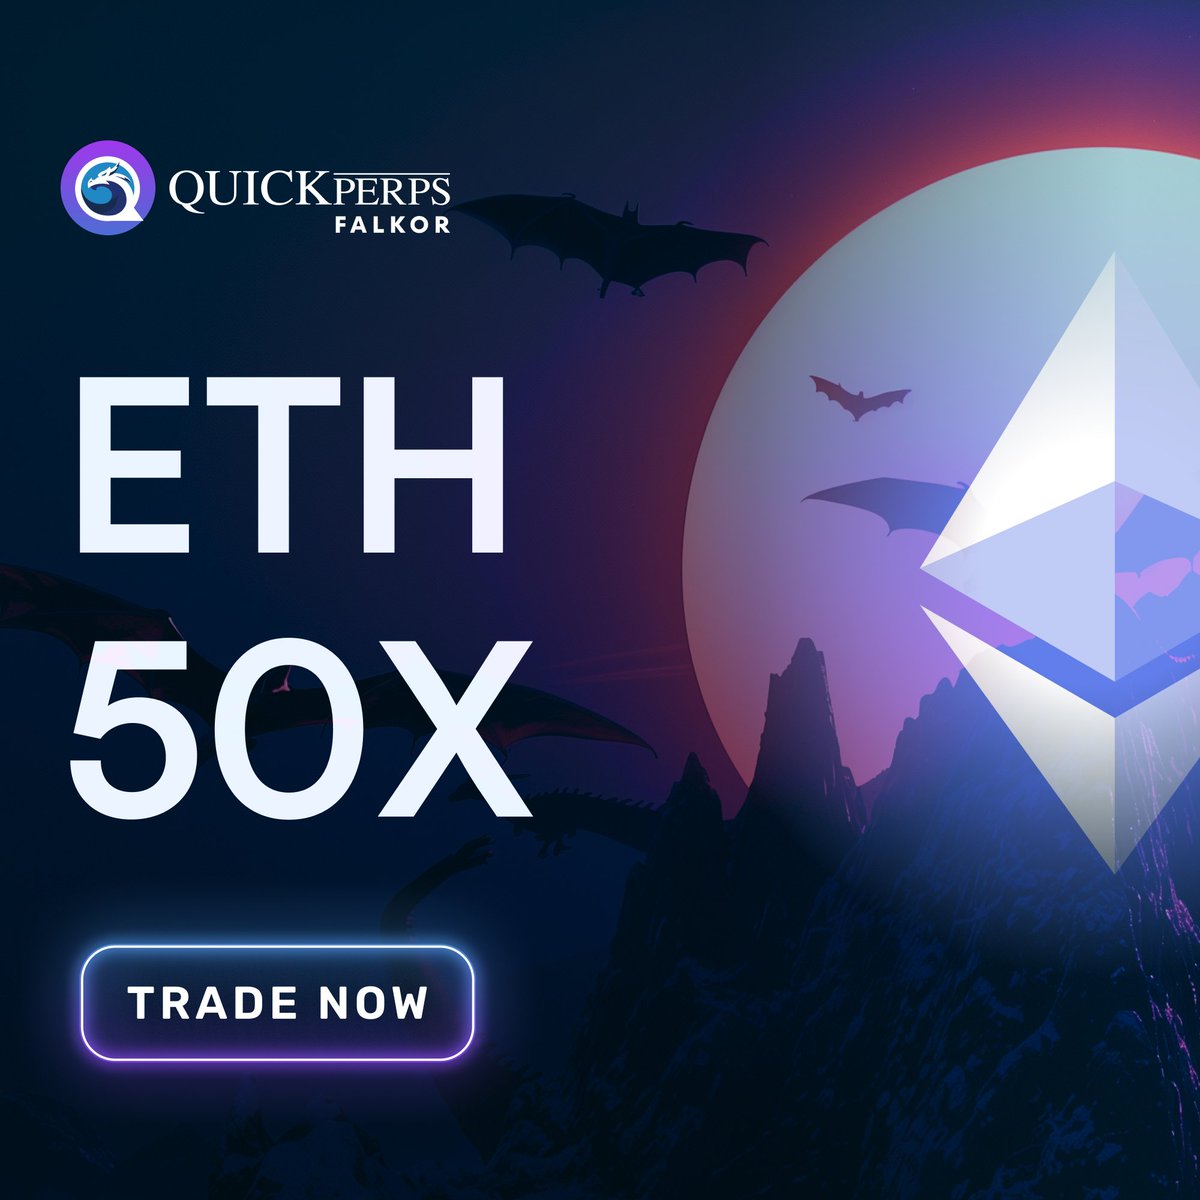 Ethereum ETF approved ✅ Go long or short on $ETH with up to 50x leverage on QuickPerps: Falkor. Directly from @0xPolygon PoS. Things are getting exciting in the crypto market. quickswap.exchange/#/falkor